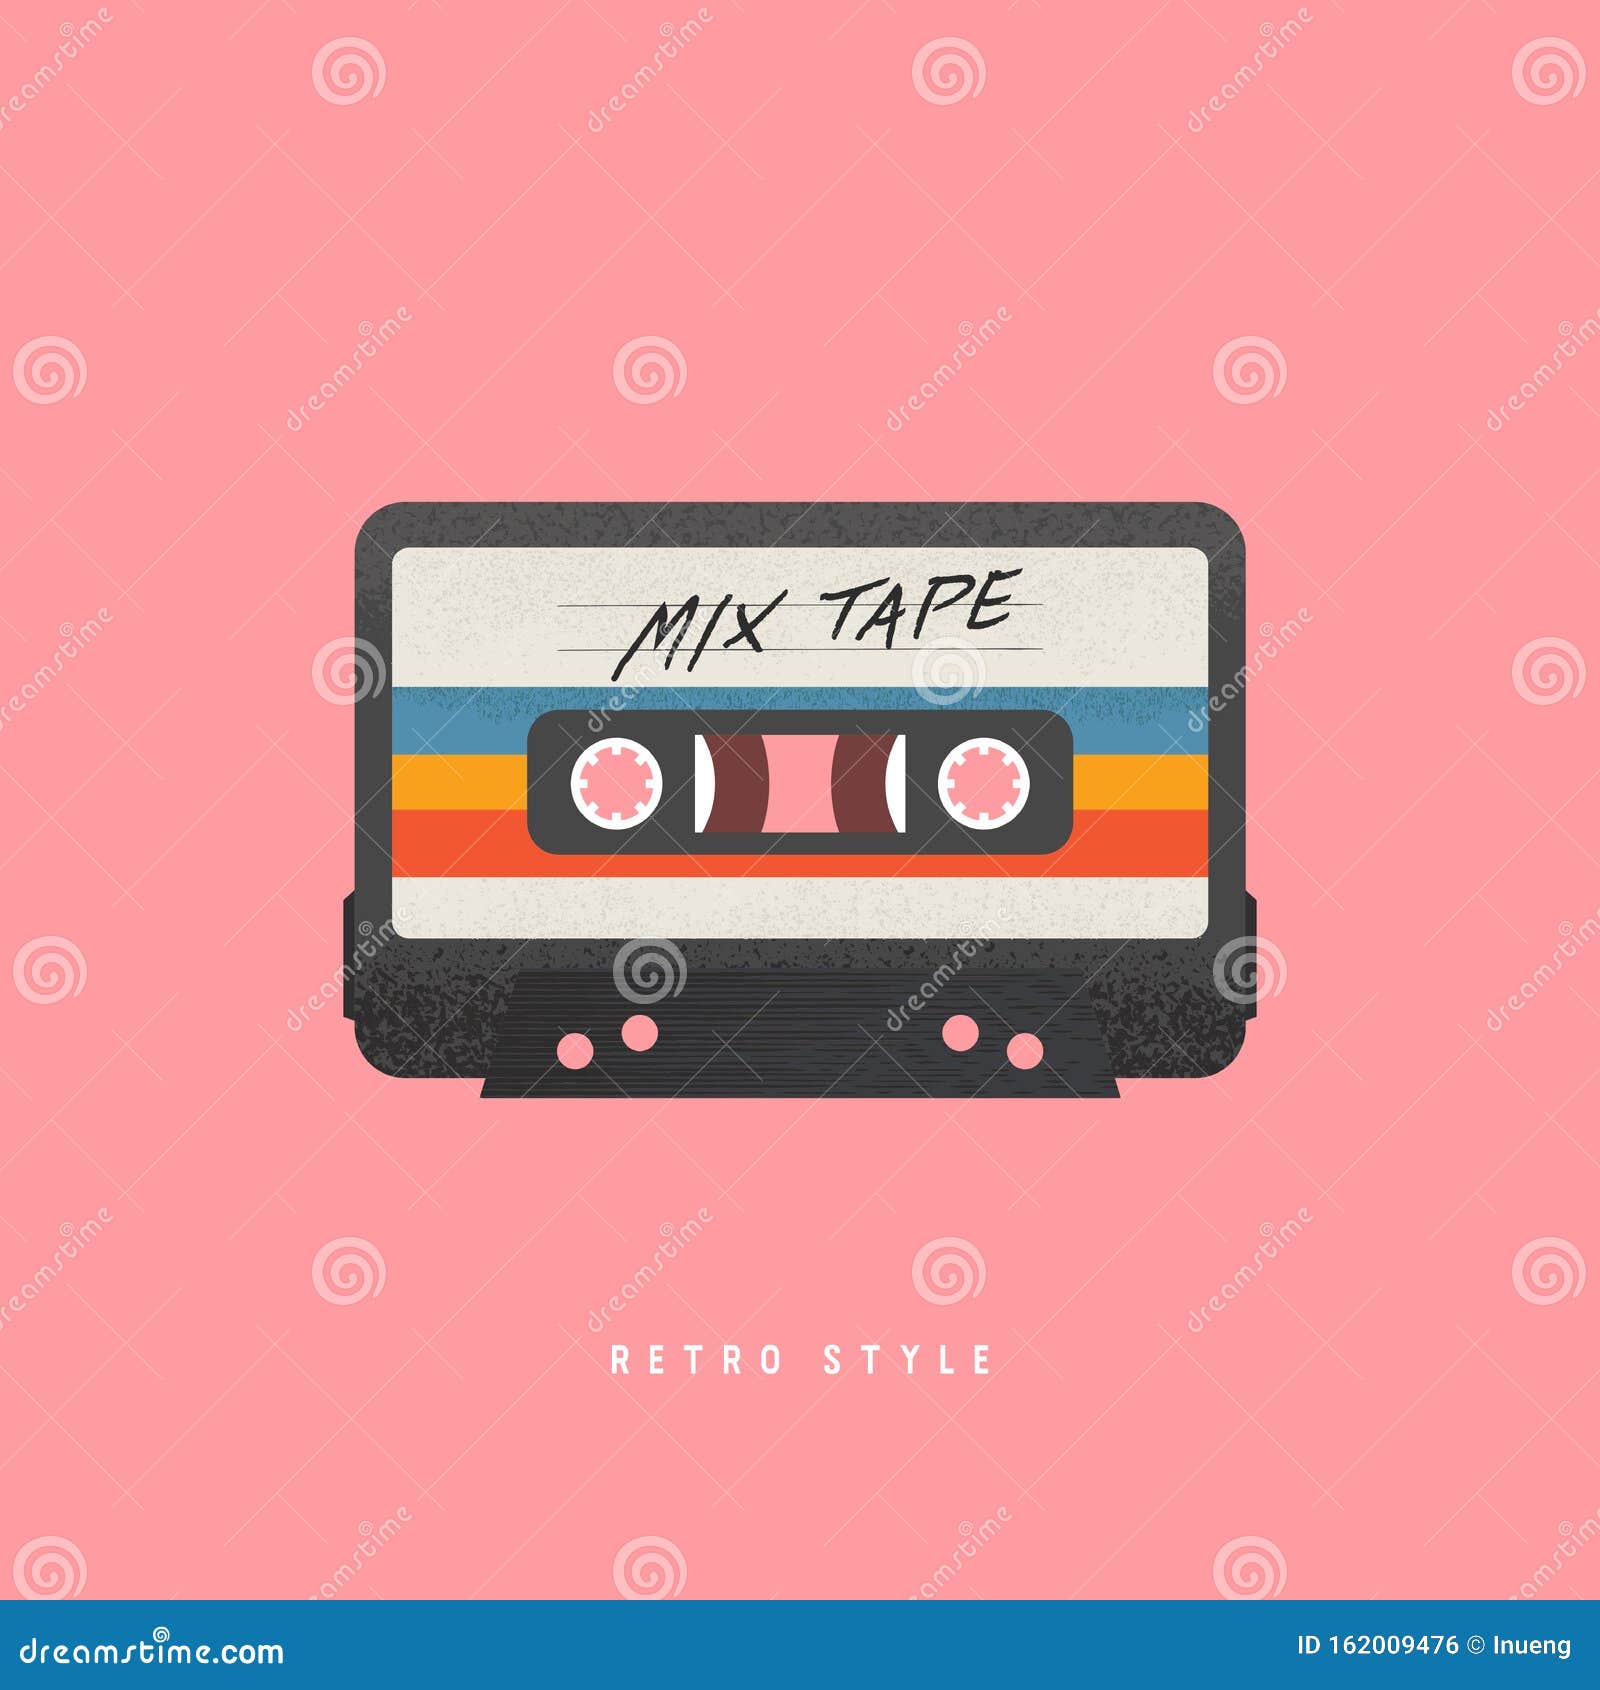 cassette with retro label as vintage object for 80s revival mix tape.